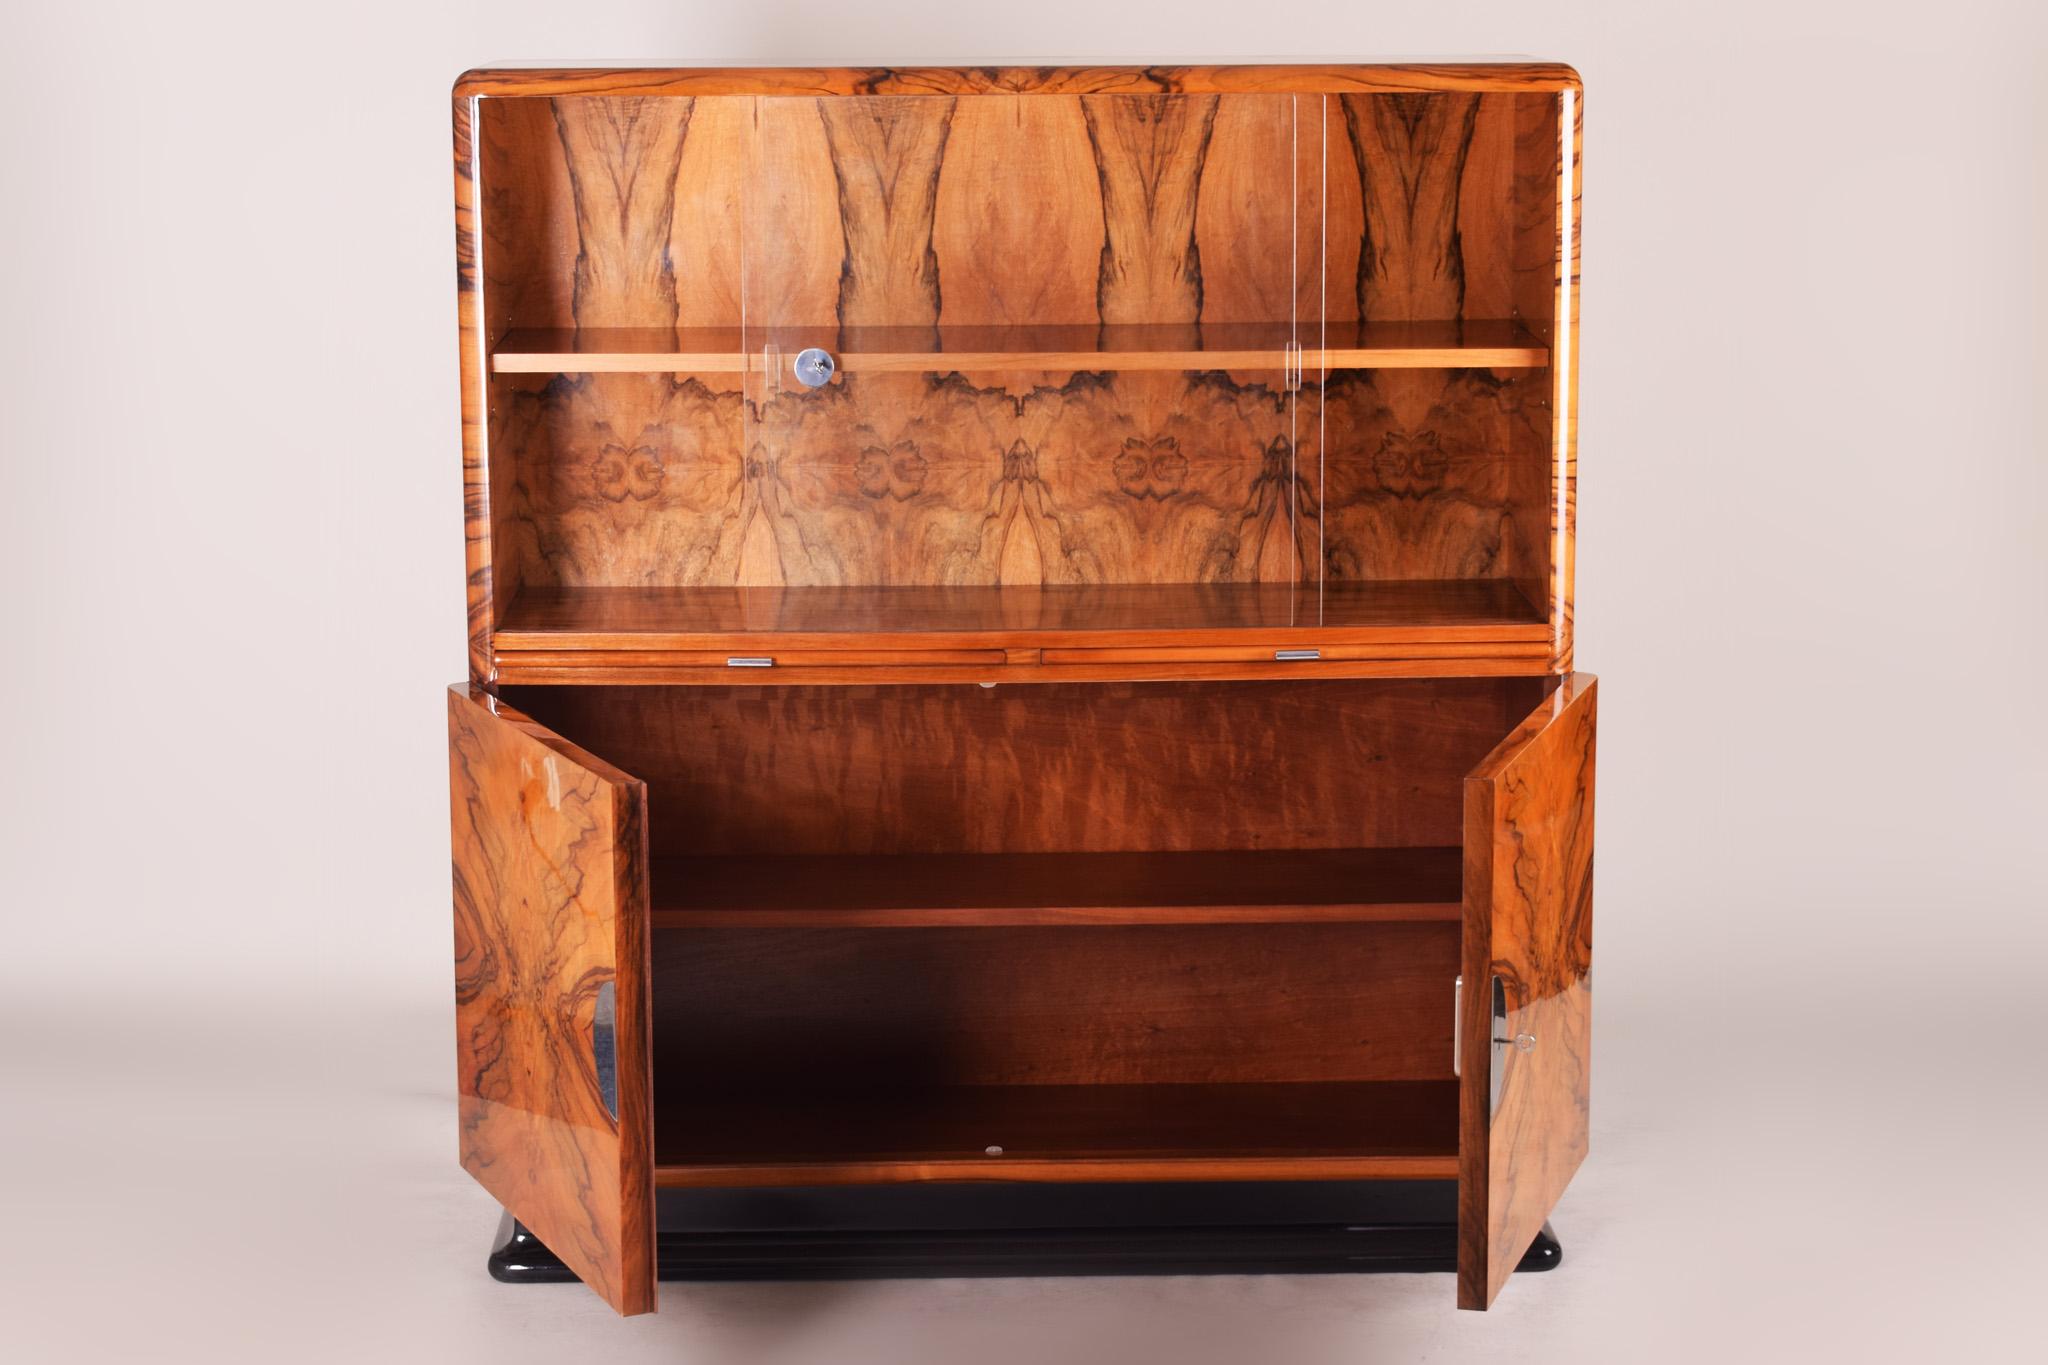 20th century Art Deco Display cabinet
Completely restored to high gloss
Material: Walnut.

We guarantee safe a the cheapest air transport from Europe to the whole world within 7 days.
The price is the same as for ship transport but delivery